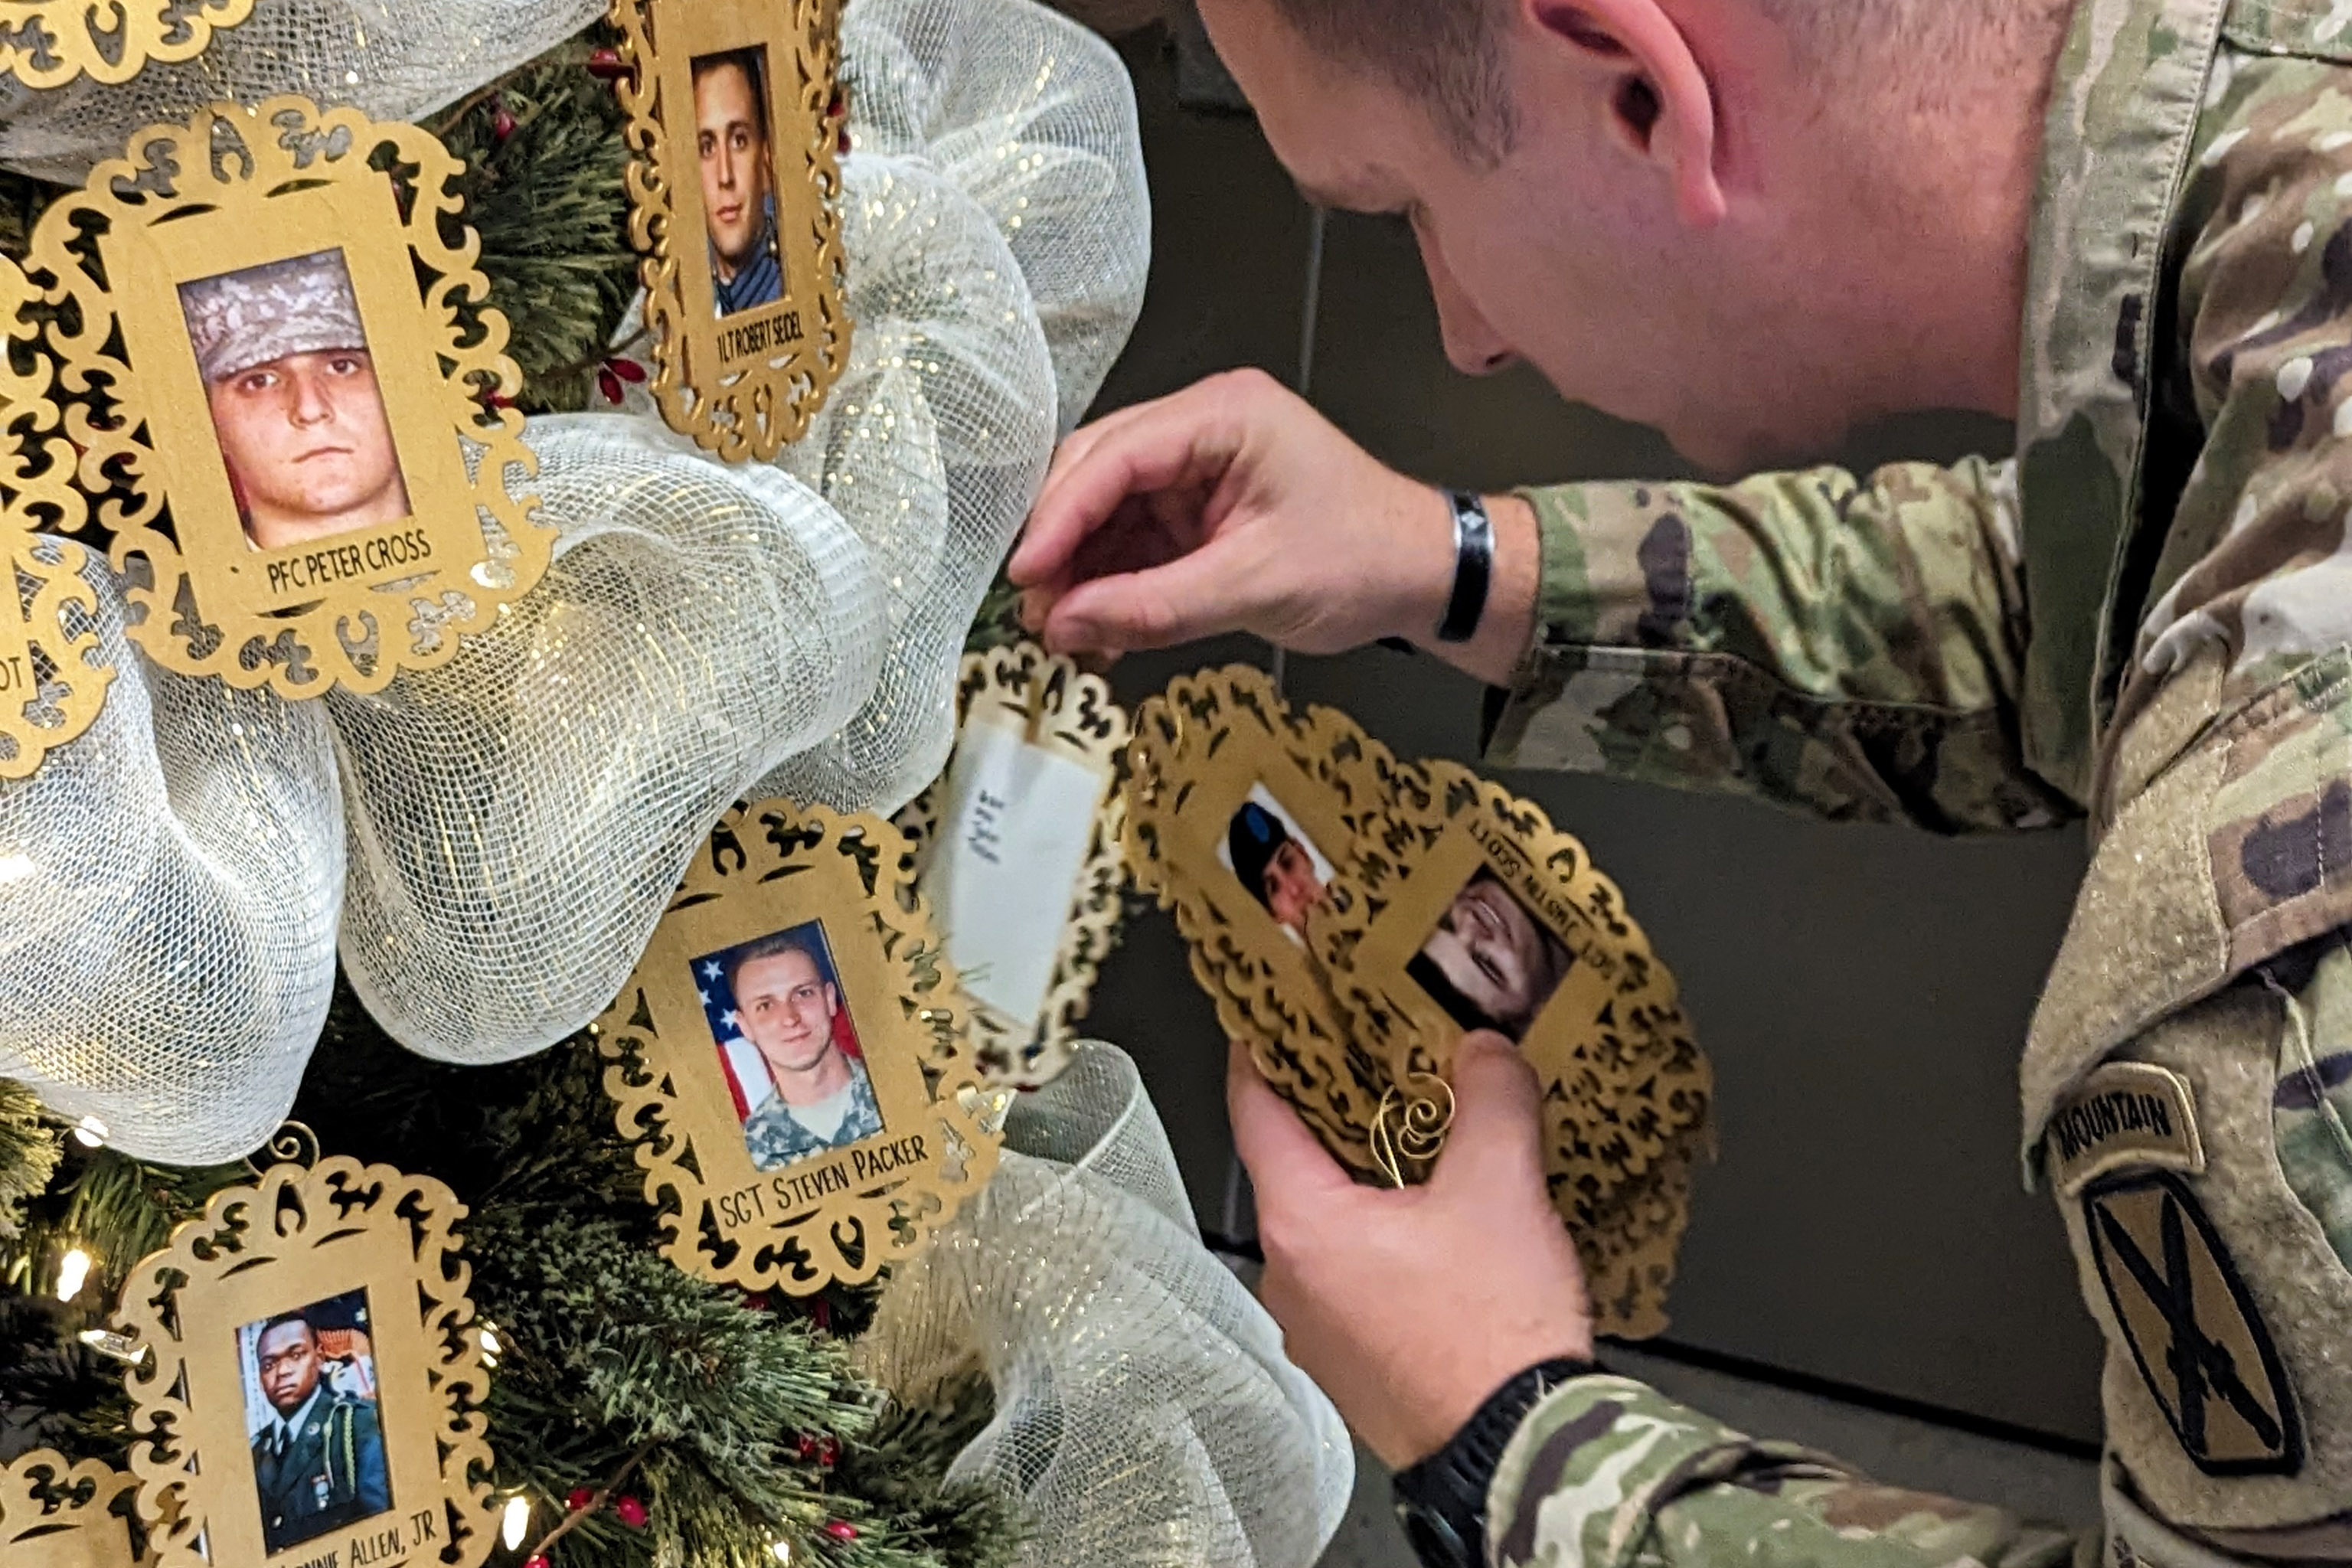 Yellow ribbons to honor our military – New Castle Record